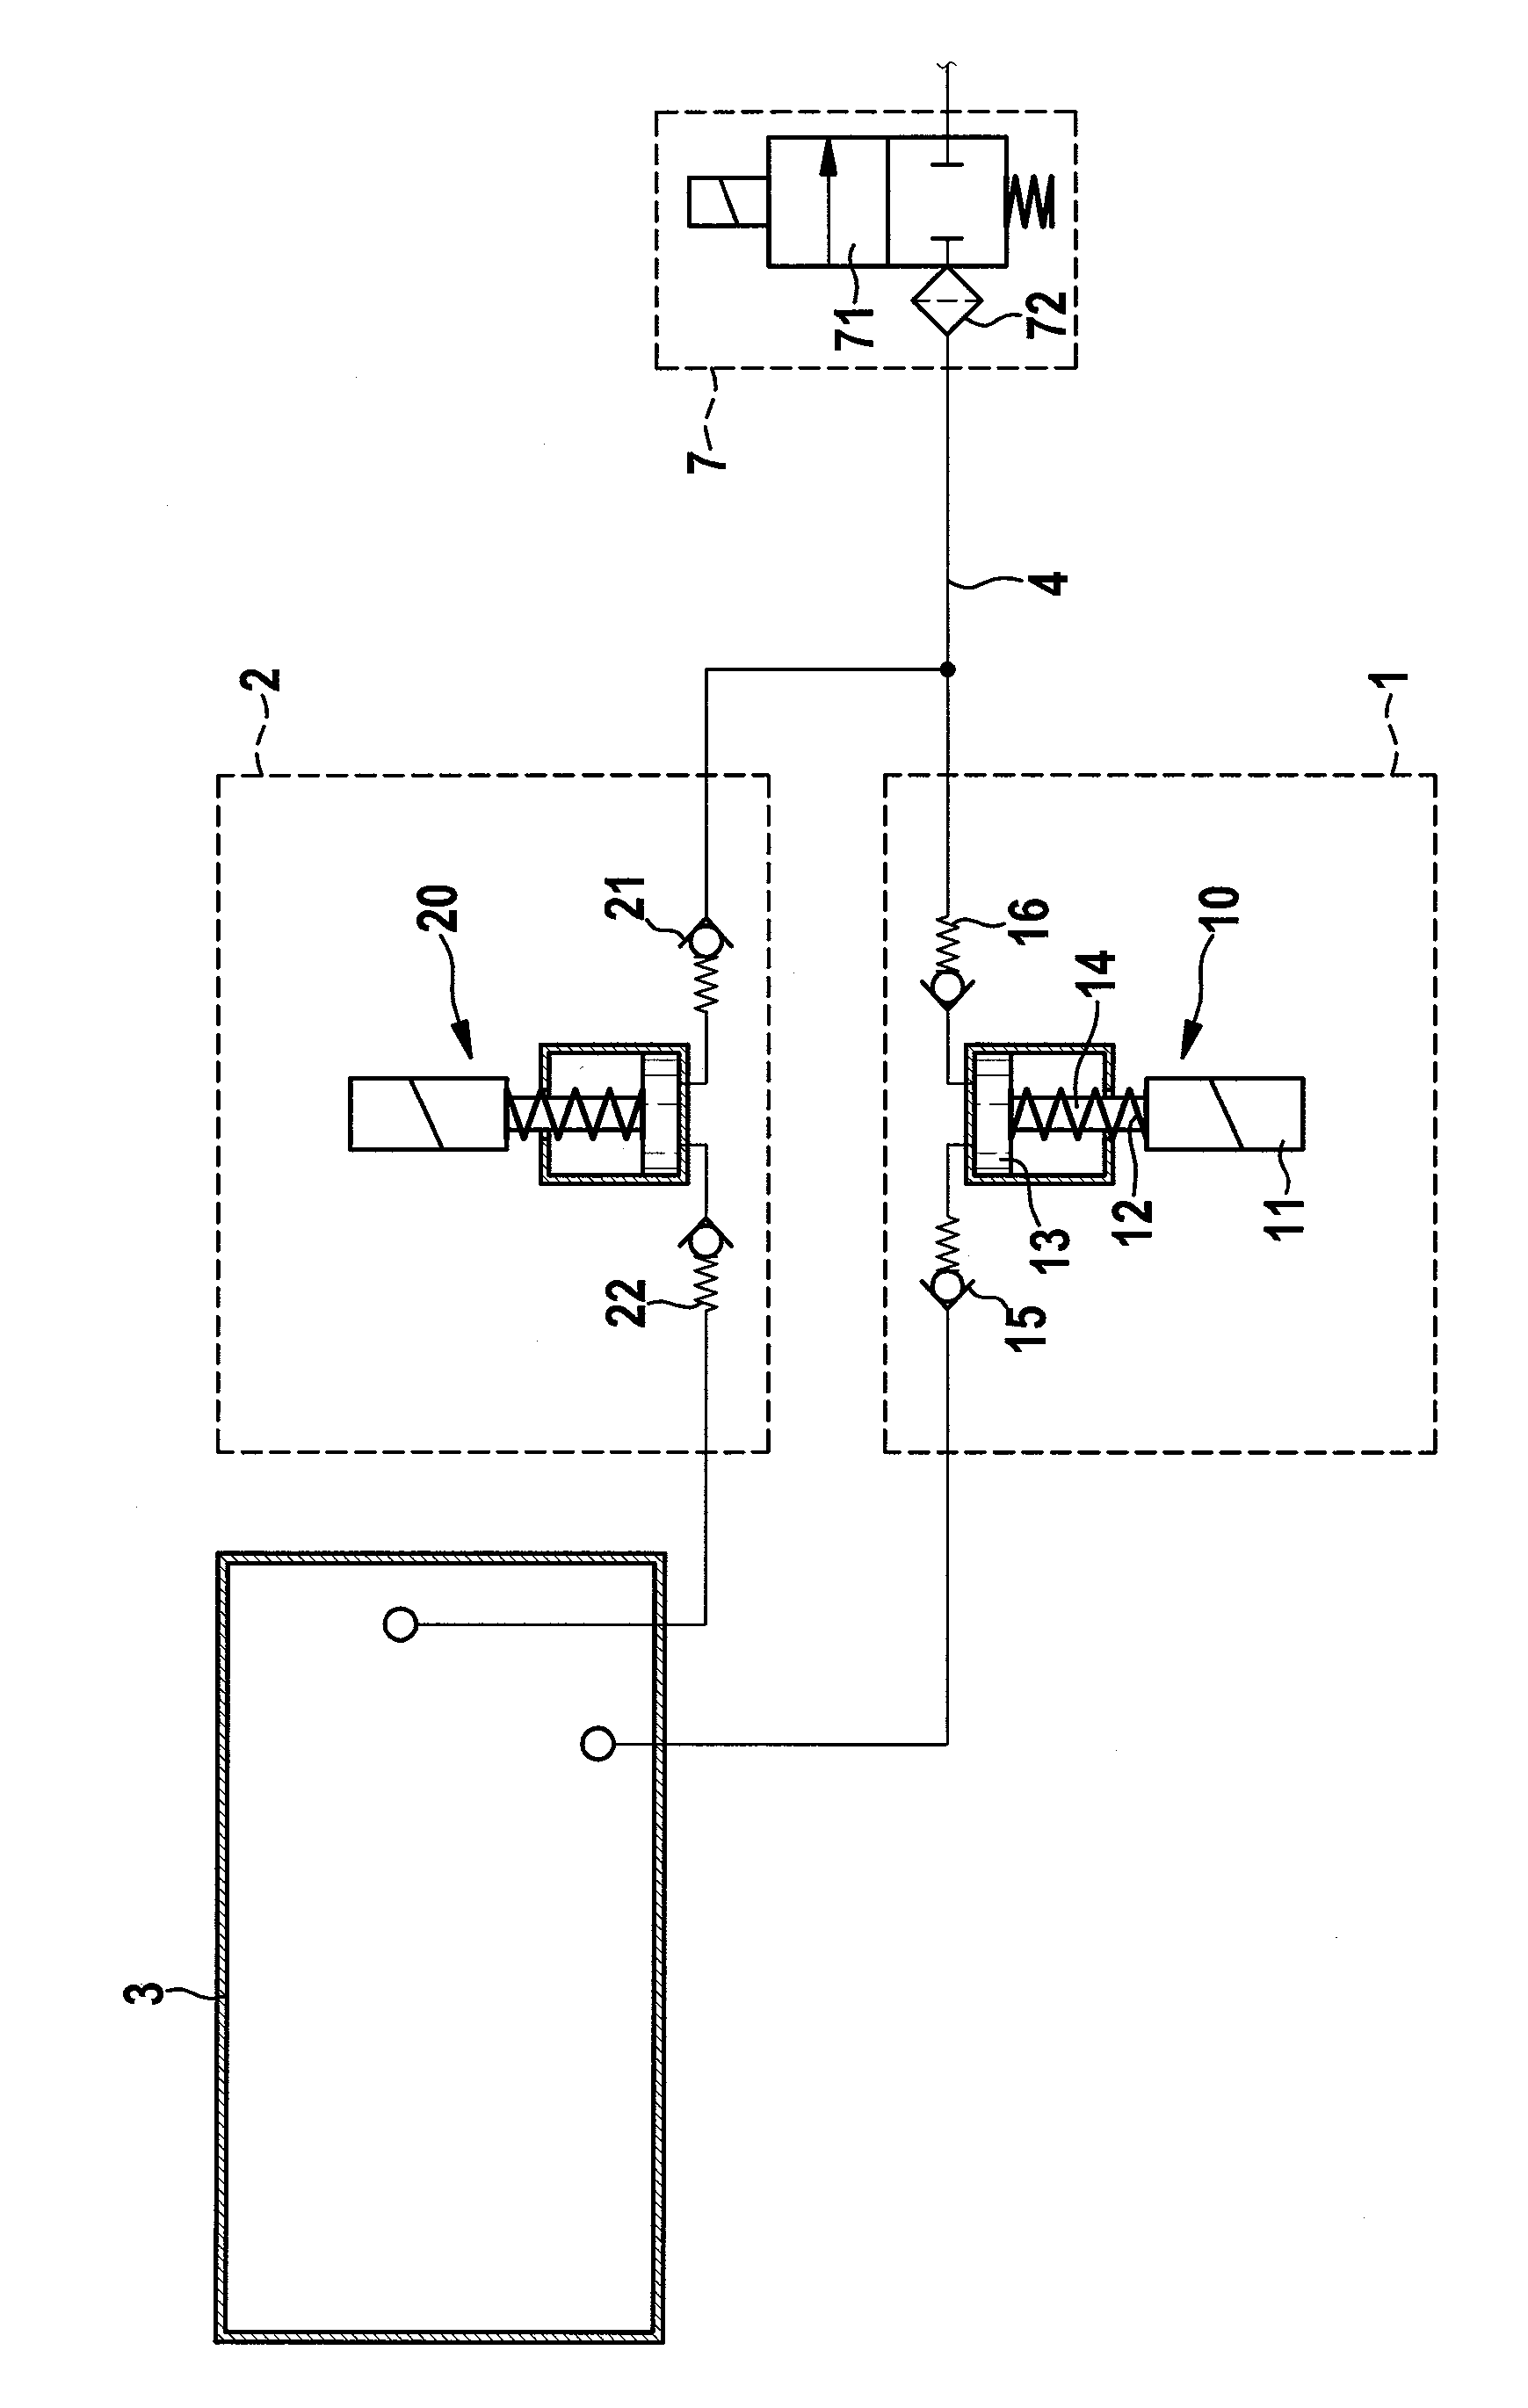 A method for operating a conveying and proportioning system